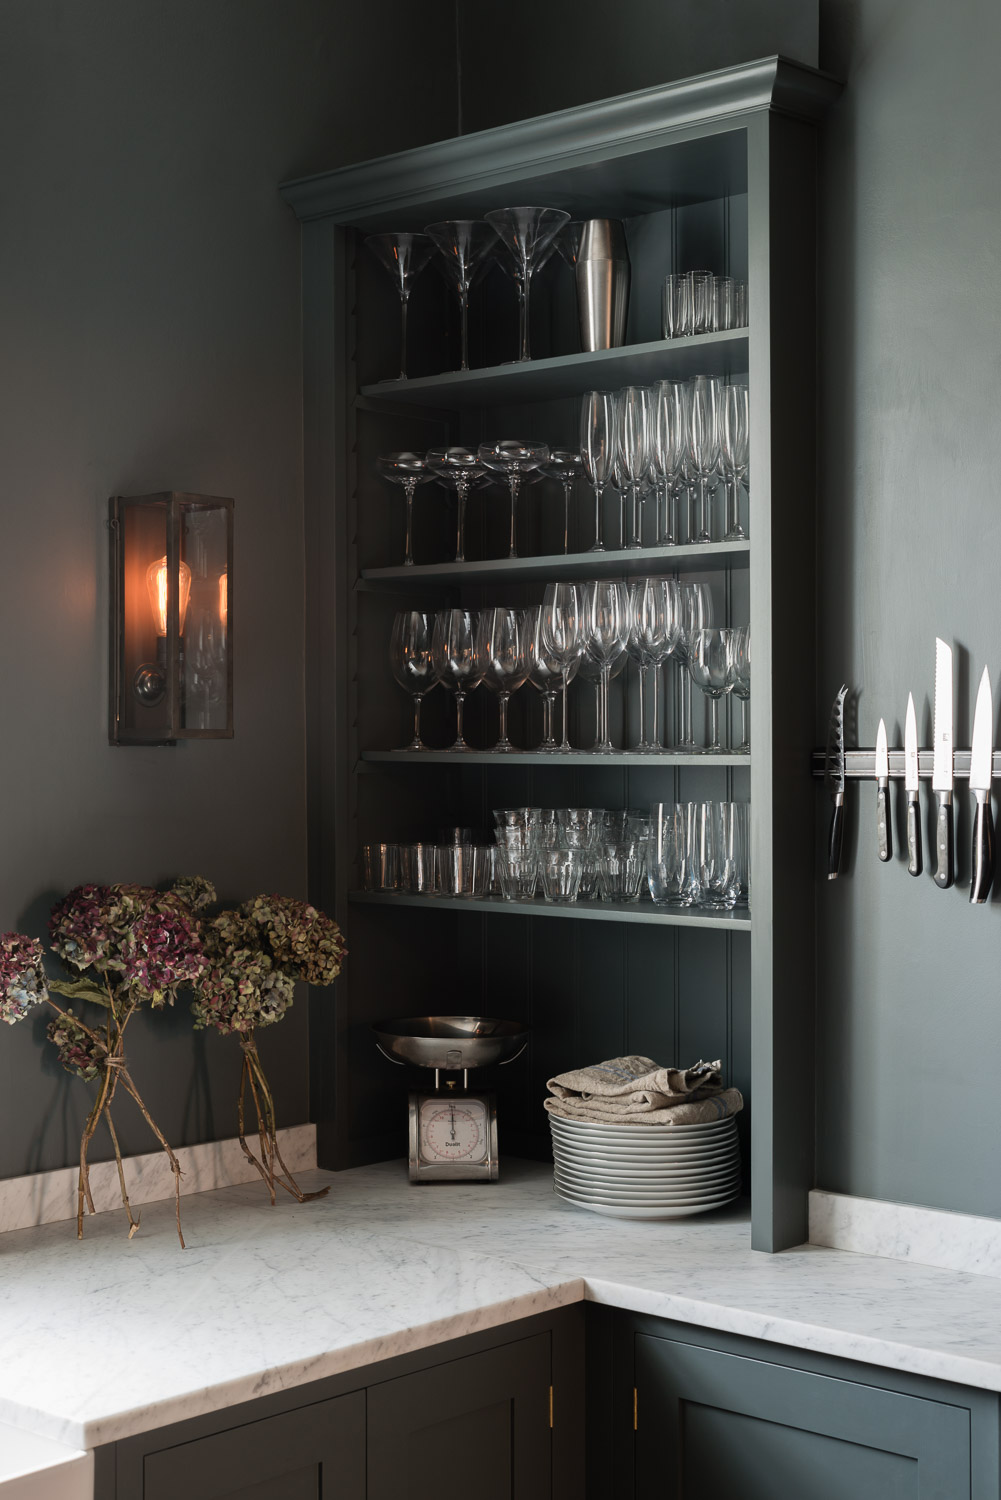 The Bloomsbury Kitchen uses Carrara marble with a smooth, honed finish. 